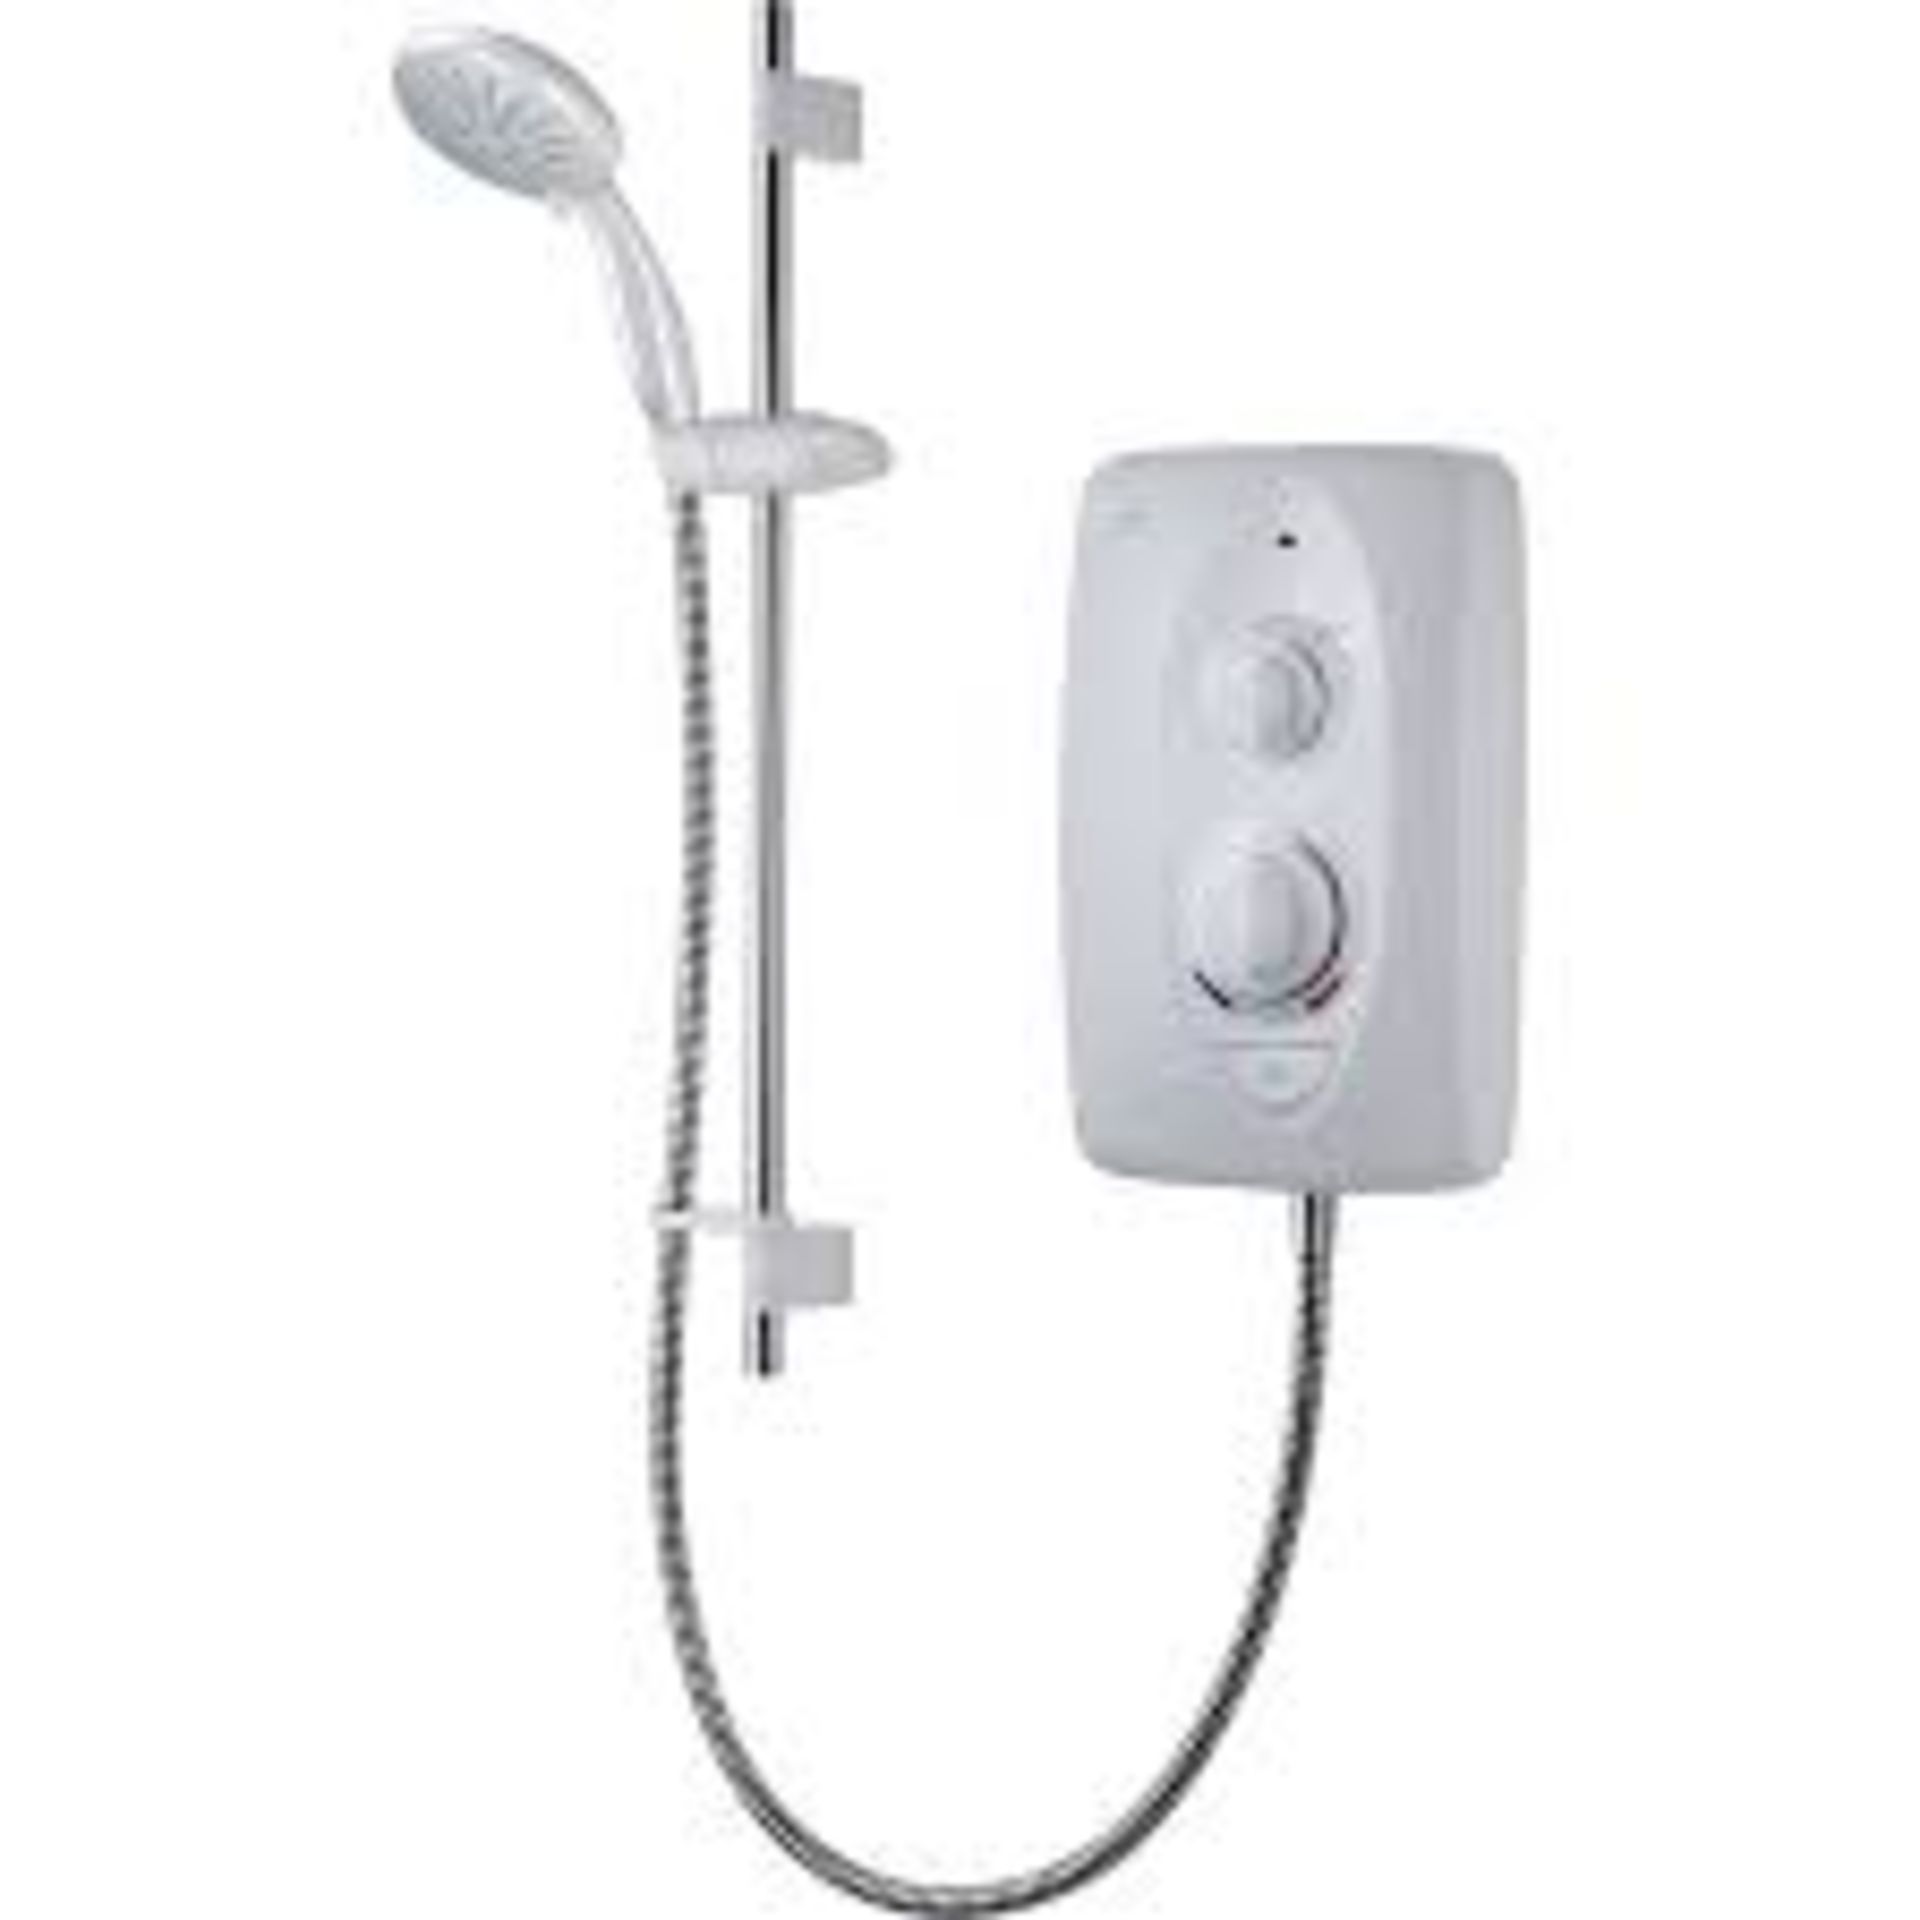 Mira Sprint Multi-Fit Electric Shower 9.5kw. - S2.13.